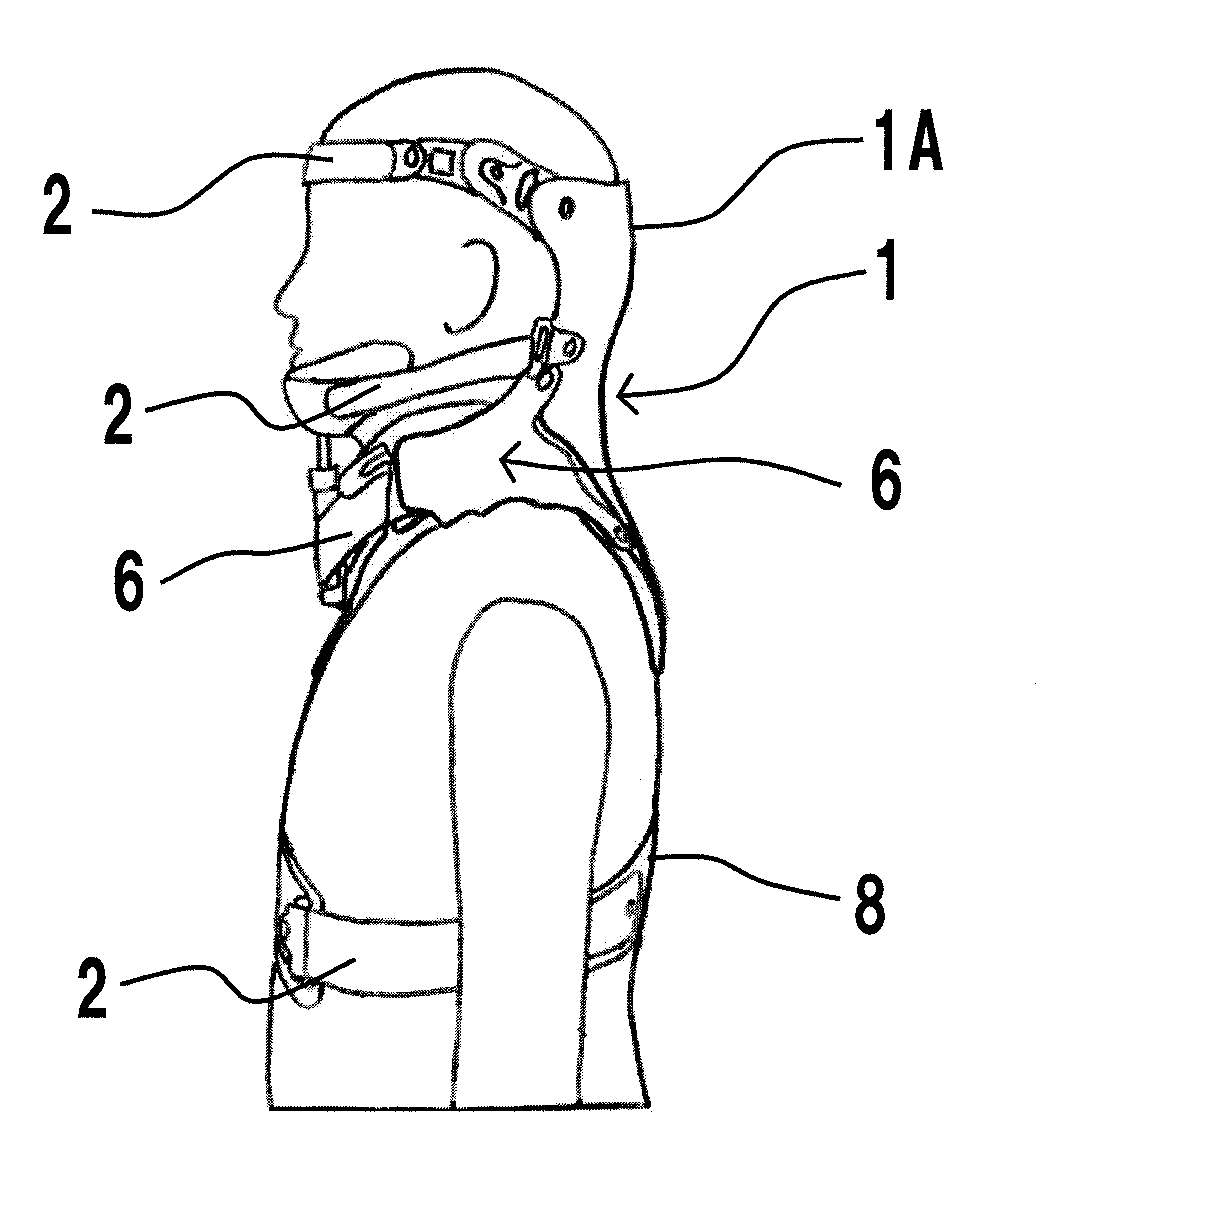 Cervical orthosis